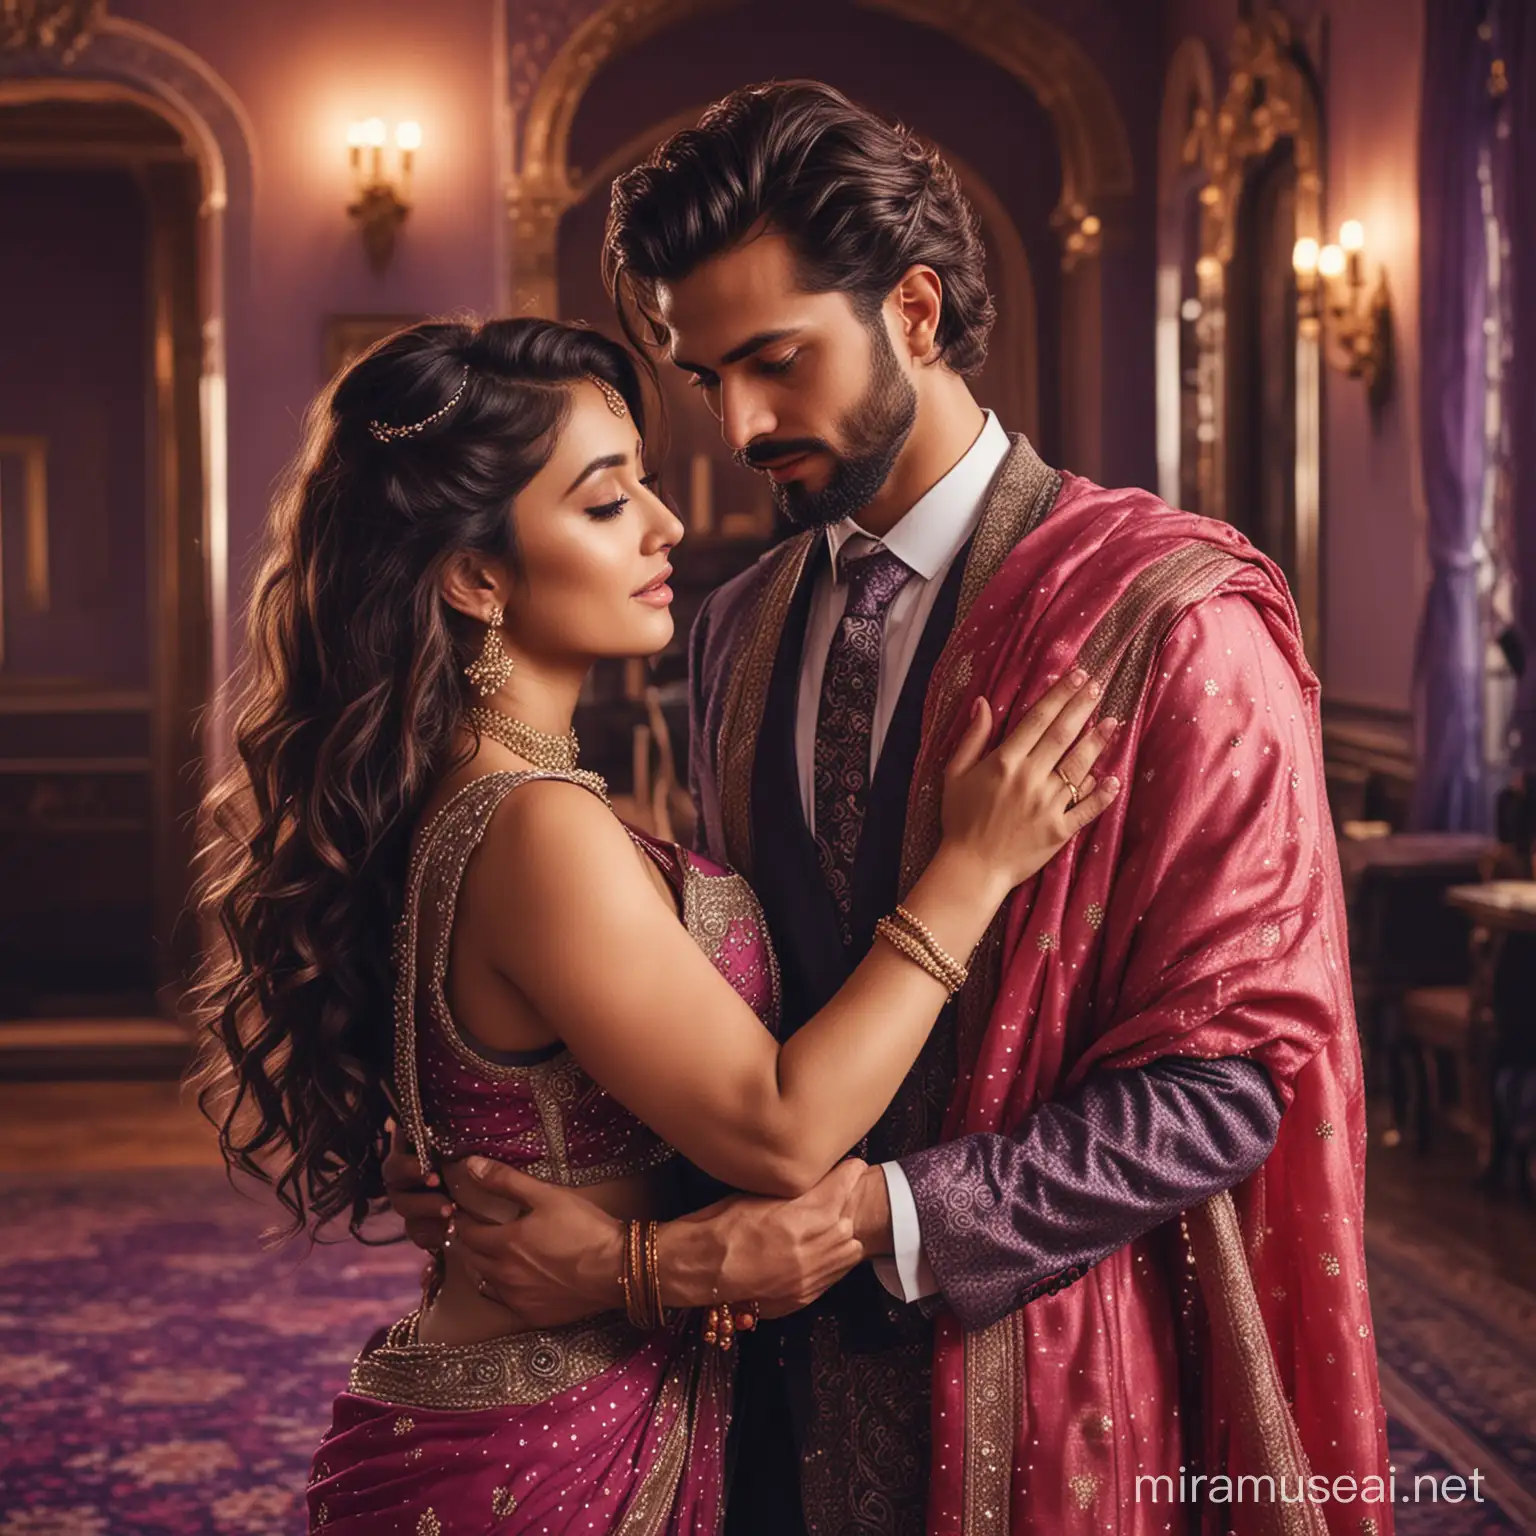 Elegant Indian Couple Embracing in Vintage Palace Interior